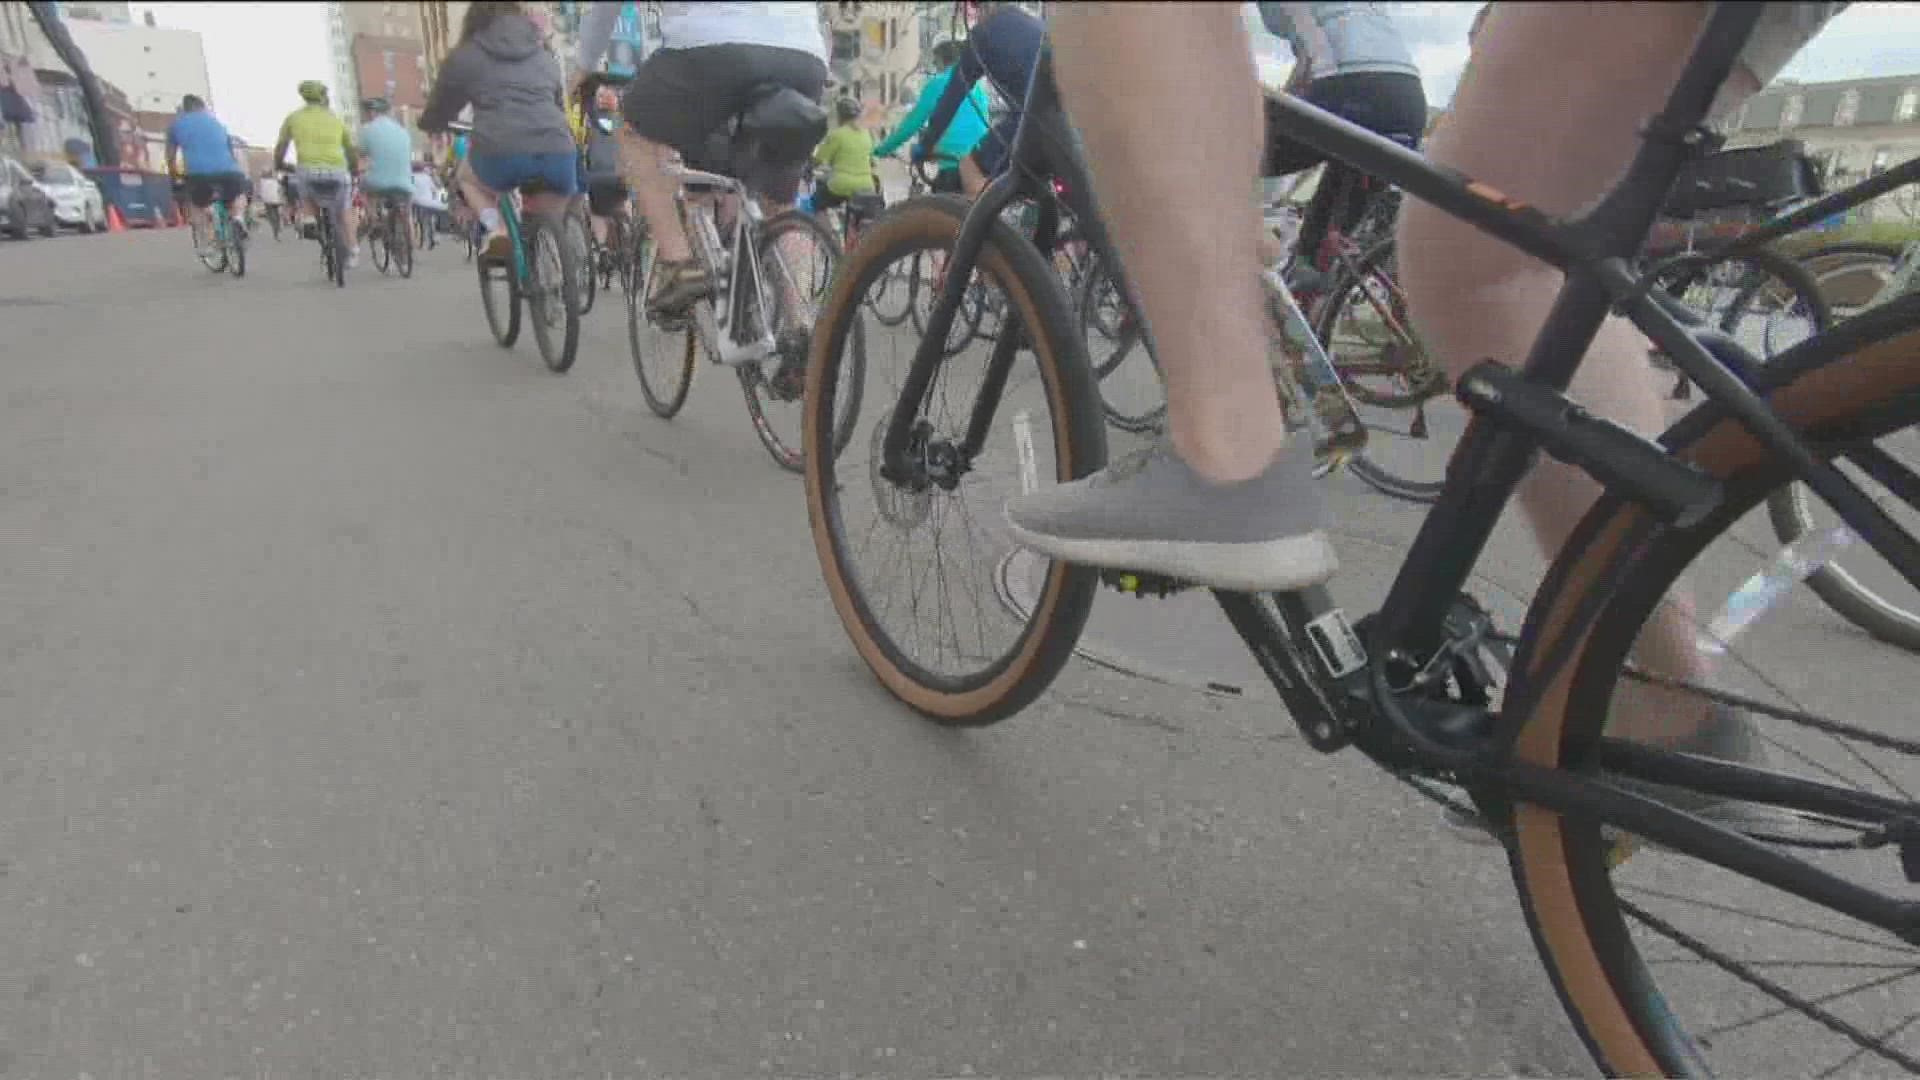 Slow Roll Buffalo is hosting the event Saturday to help teach riders about our local food resources and farms.